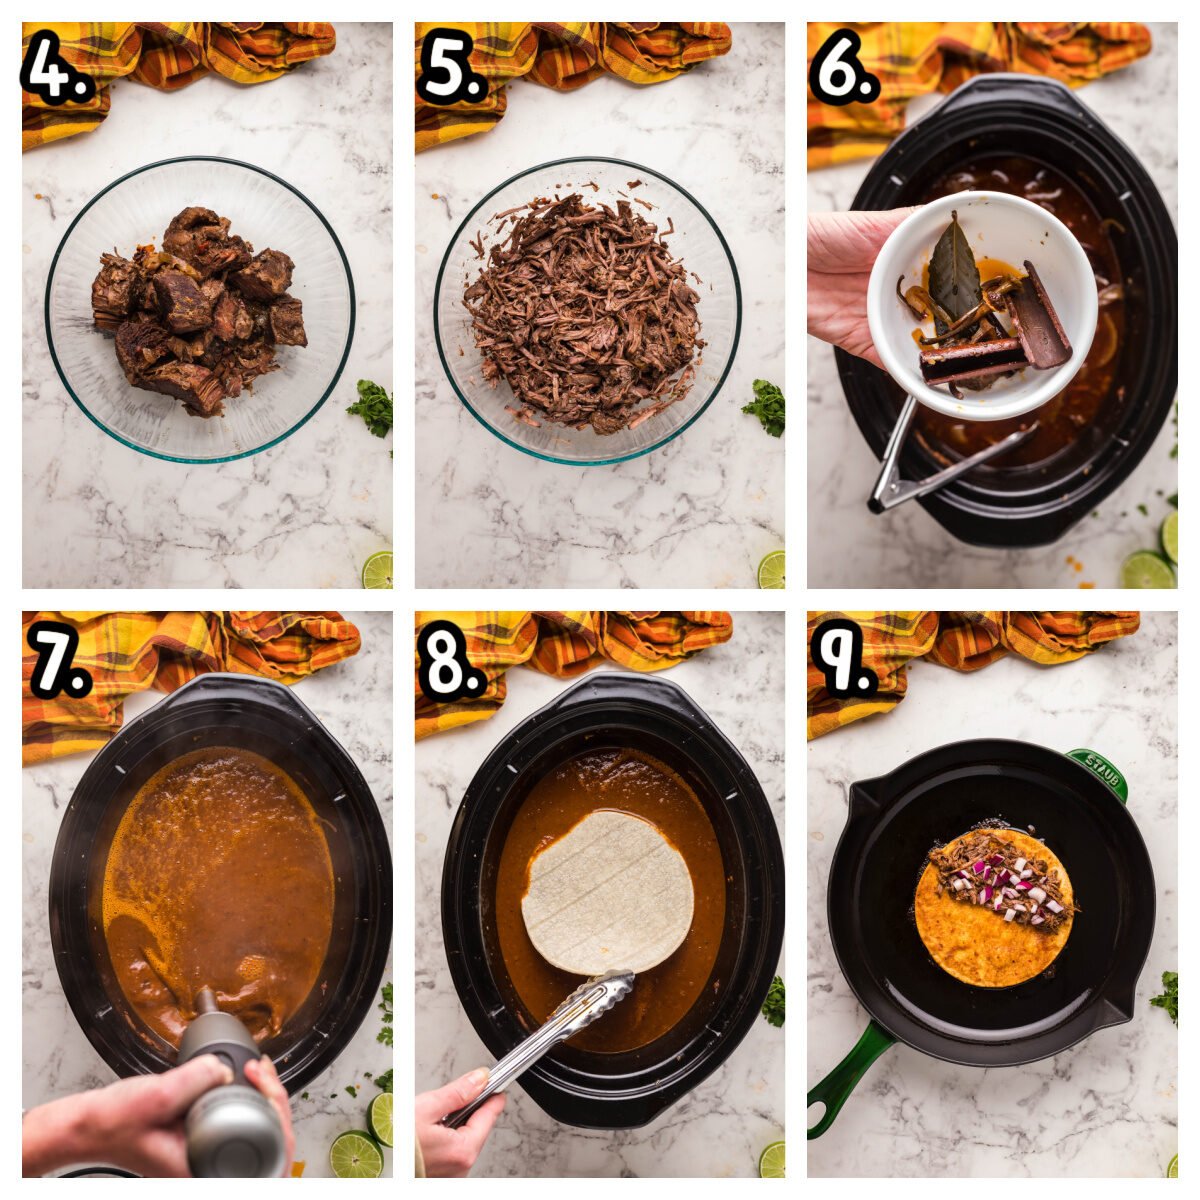 6 images, showing how to shred meat, blend sauce and prepare birria tacos.